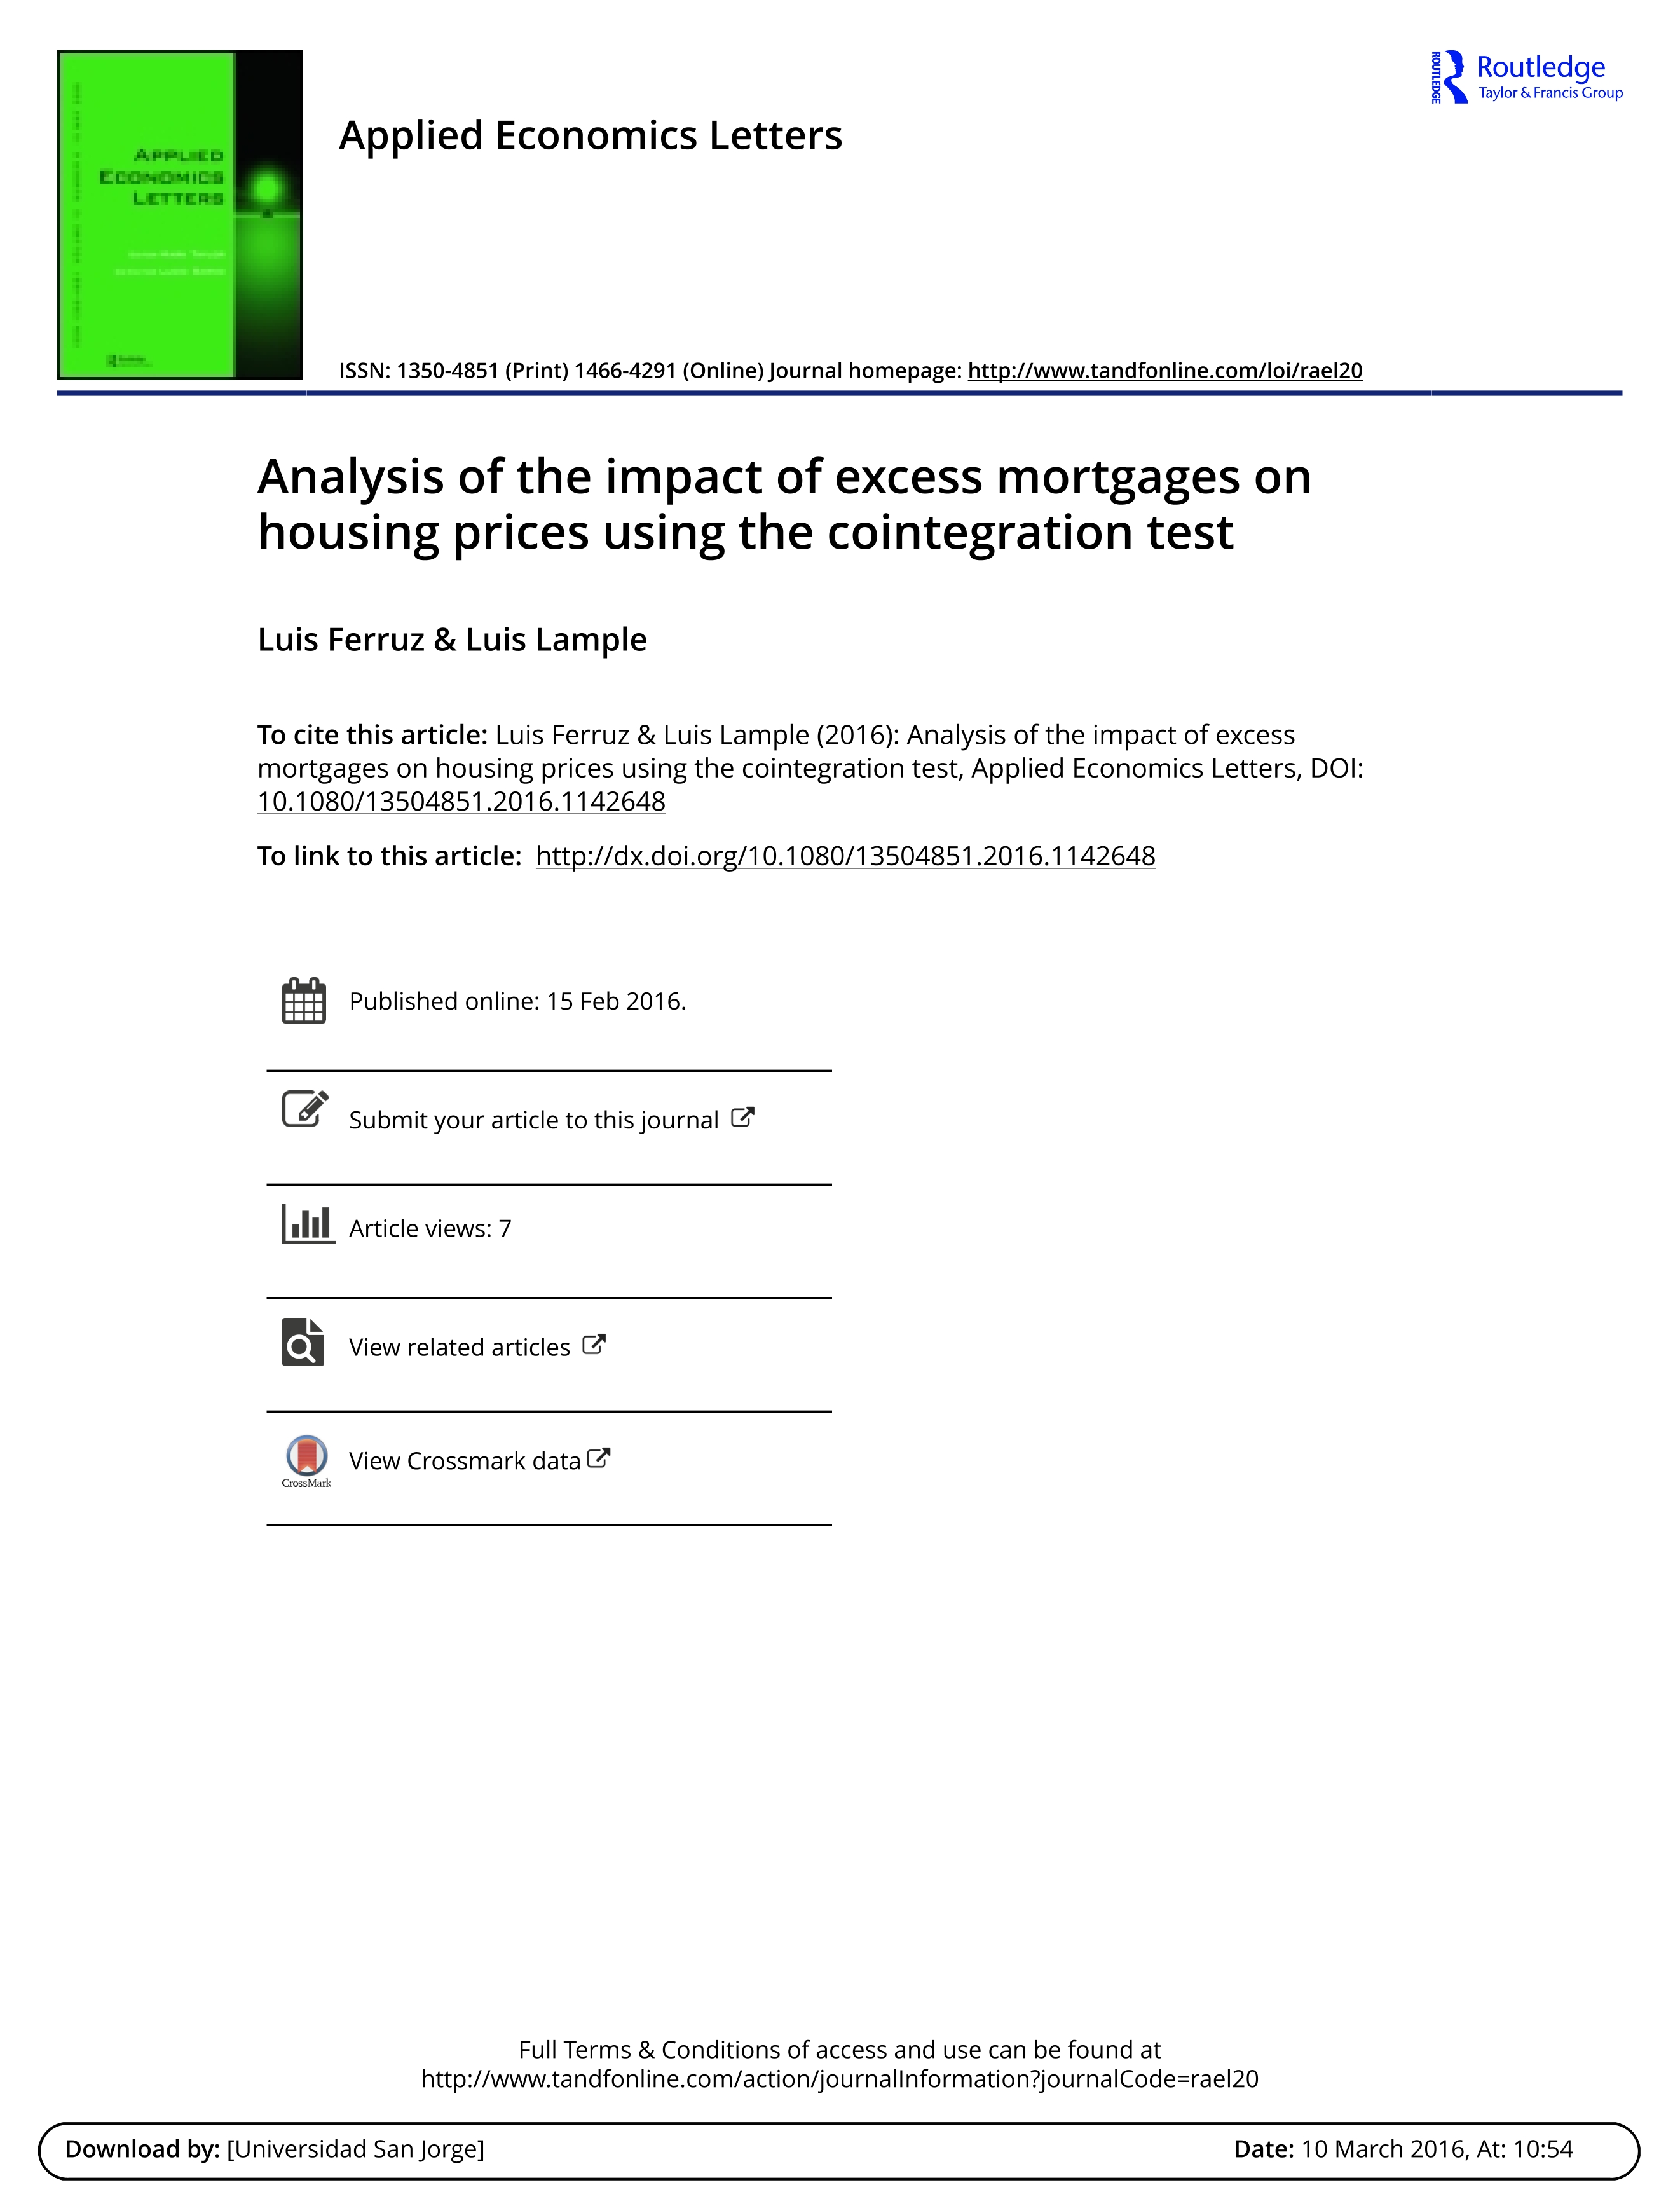 Analysis of the impact of excess mortgages on housing prices using the cointegration test